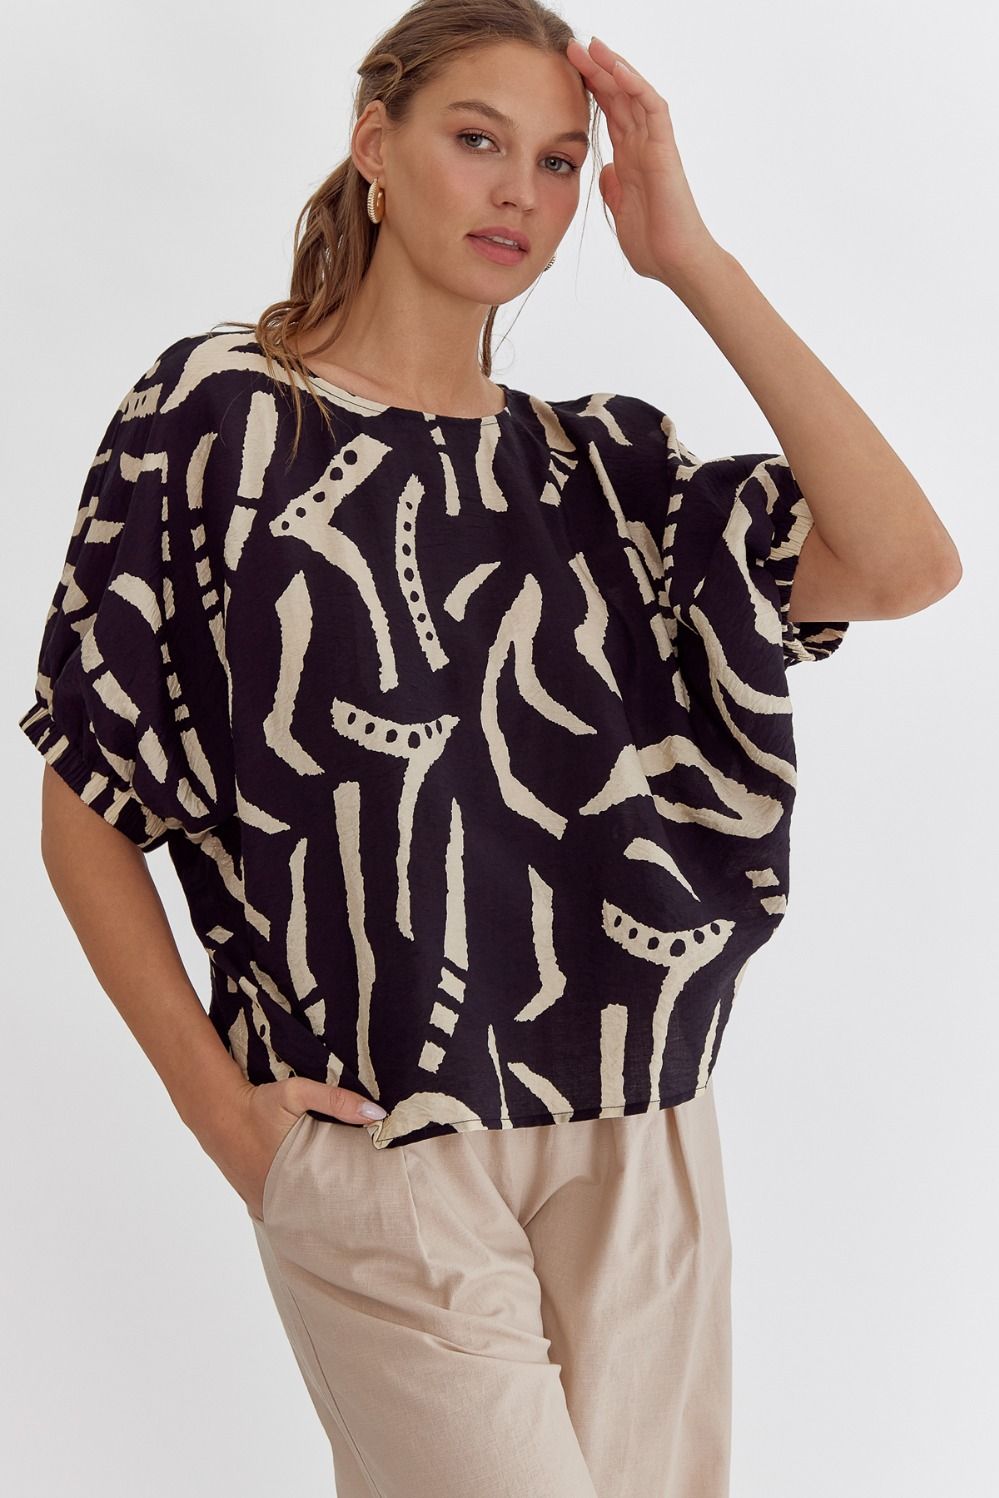 ENTRO INC Women's Top Printed Round Neck Cropped Top || David's Clothing